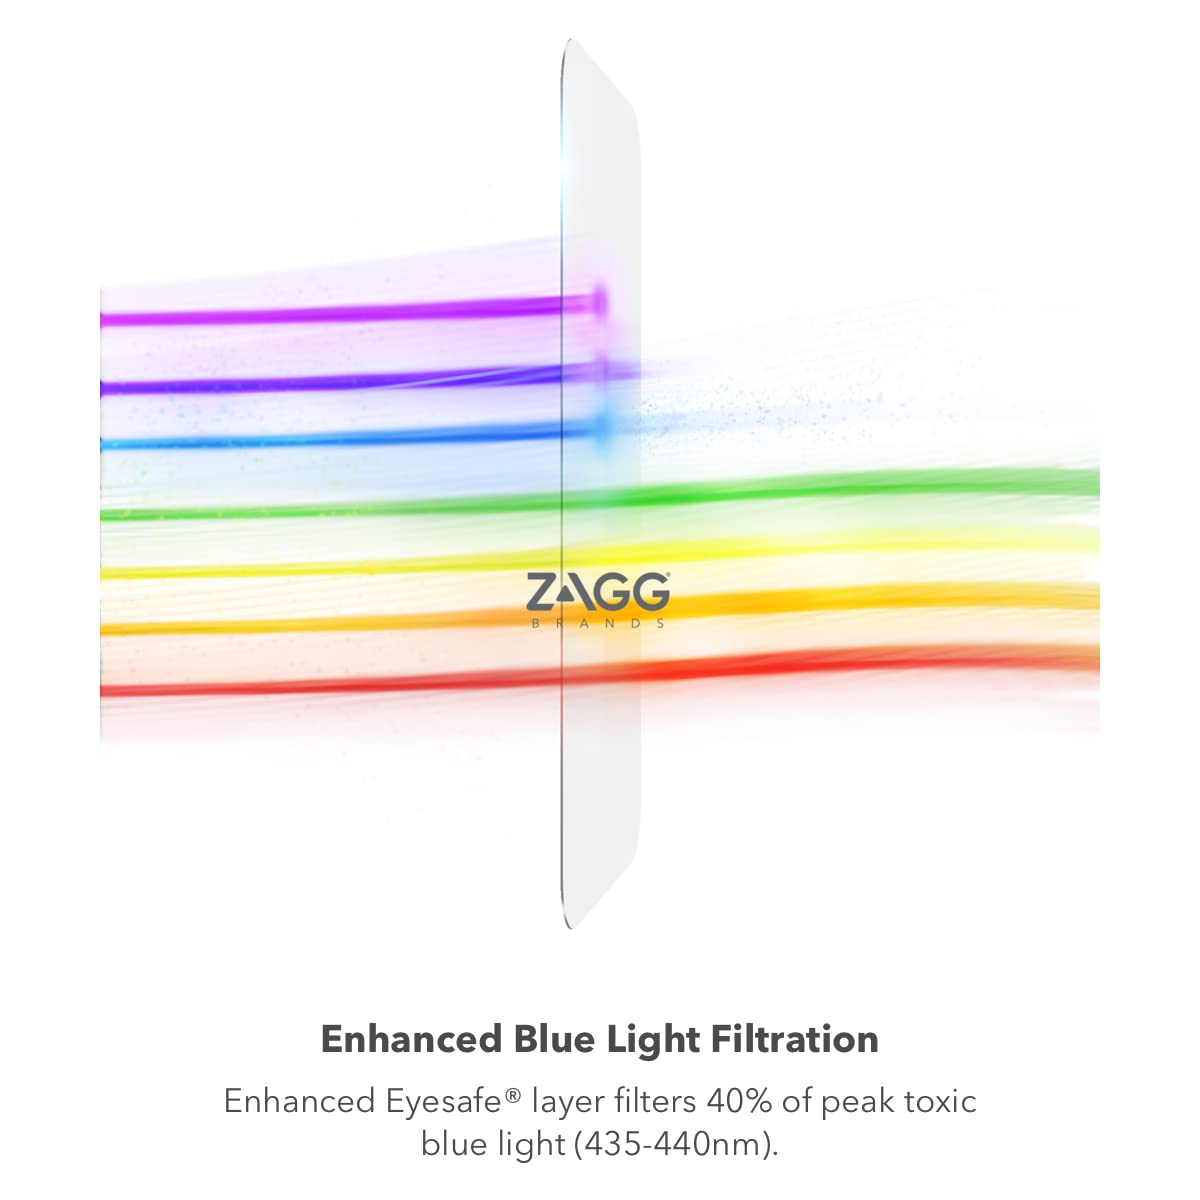 ZAGG invisibleShield Glass Elite VisionGuard+- Screen Protector - with Blue Light Filter - for iPhone 11 Pro, iPhone Xs, iPhone X - Impact Protection